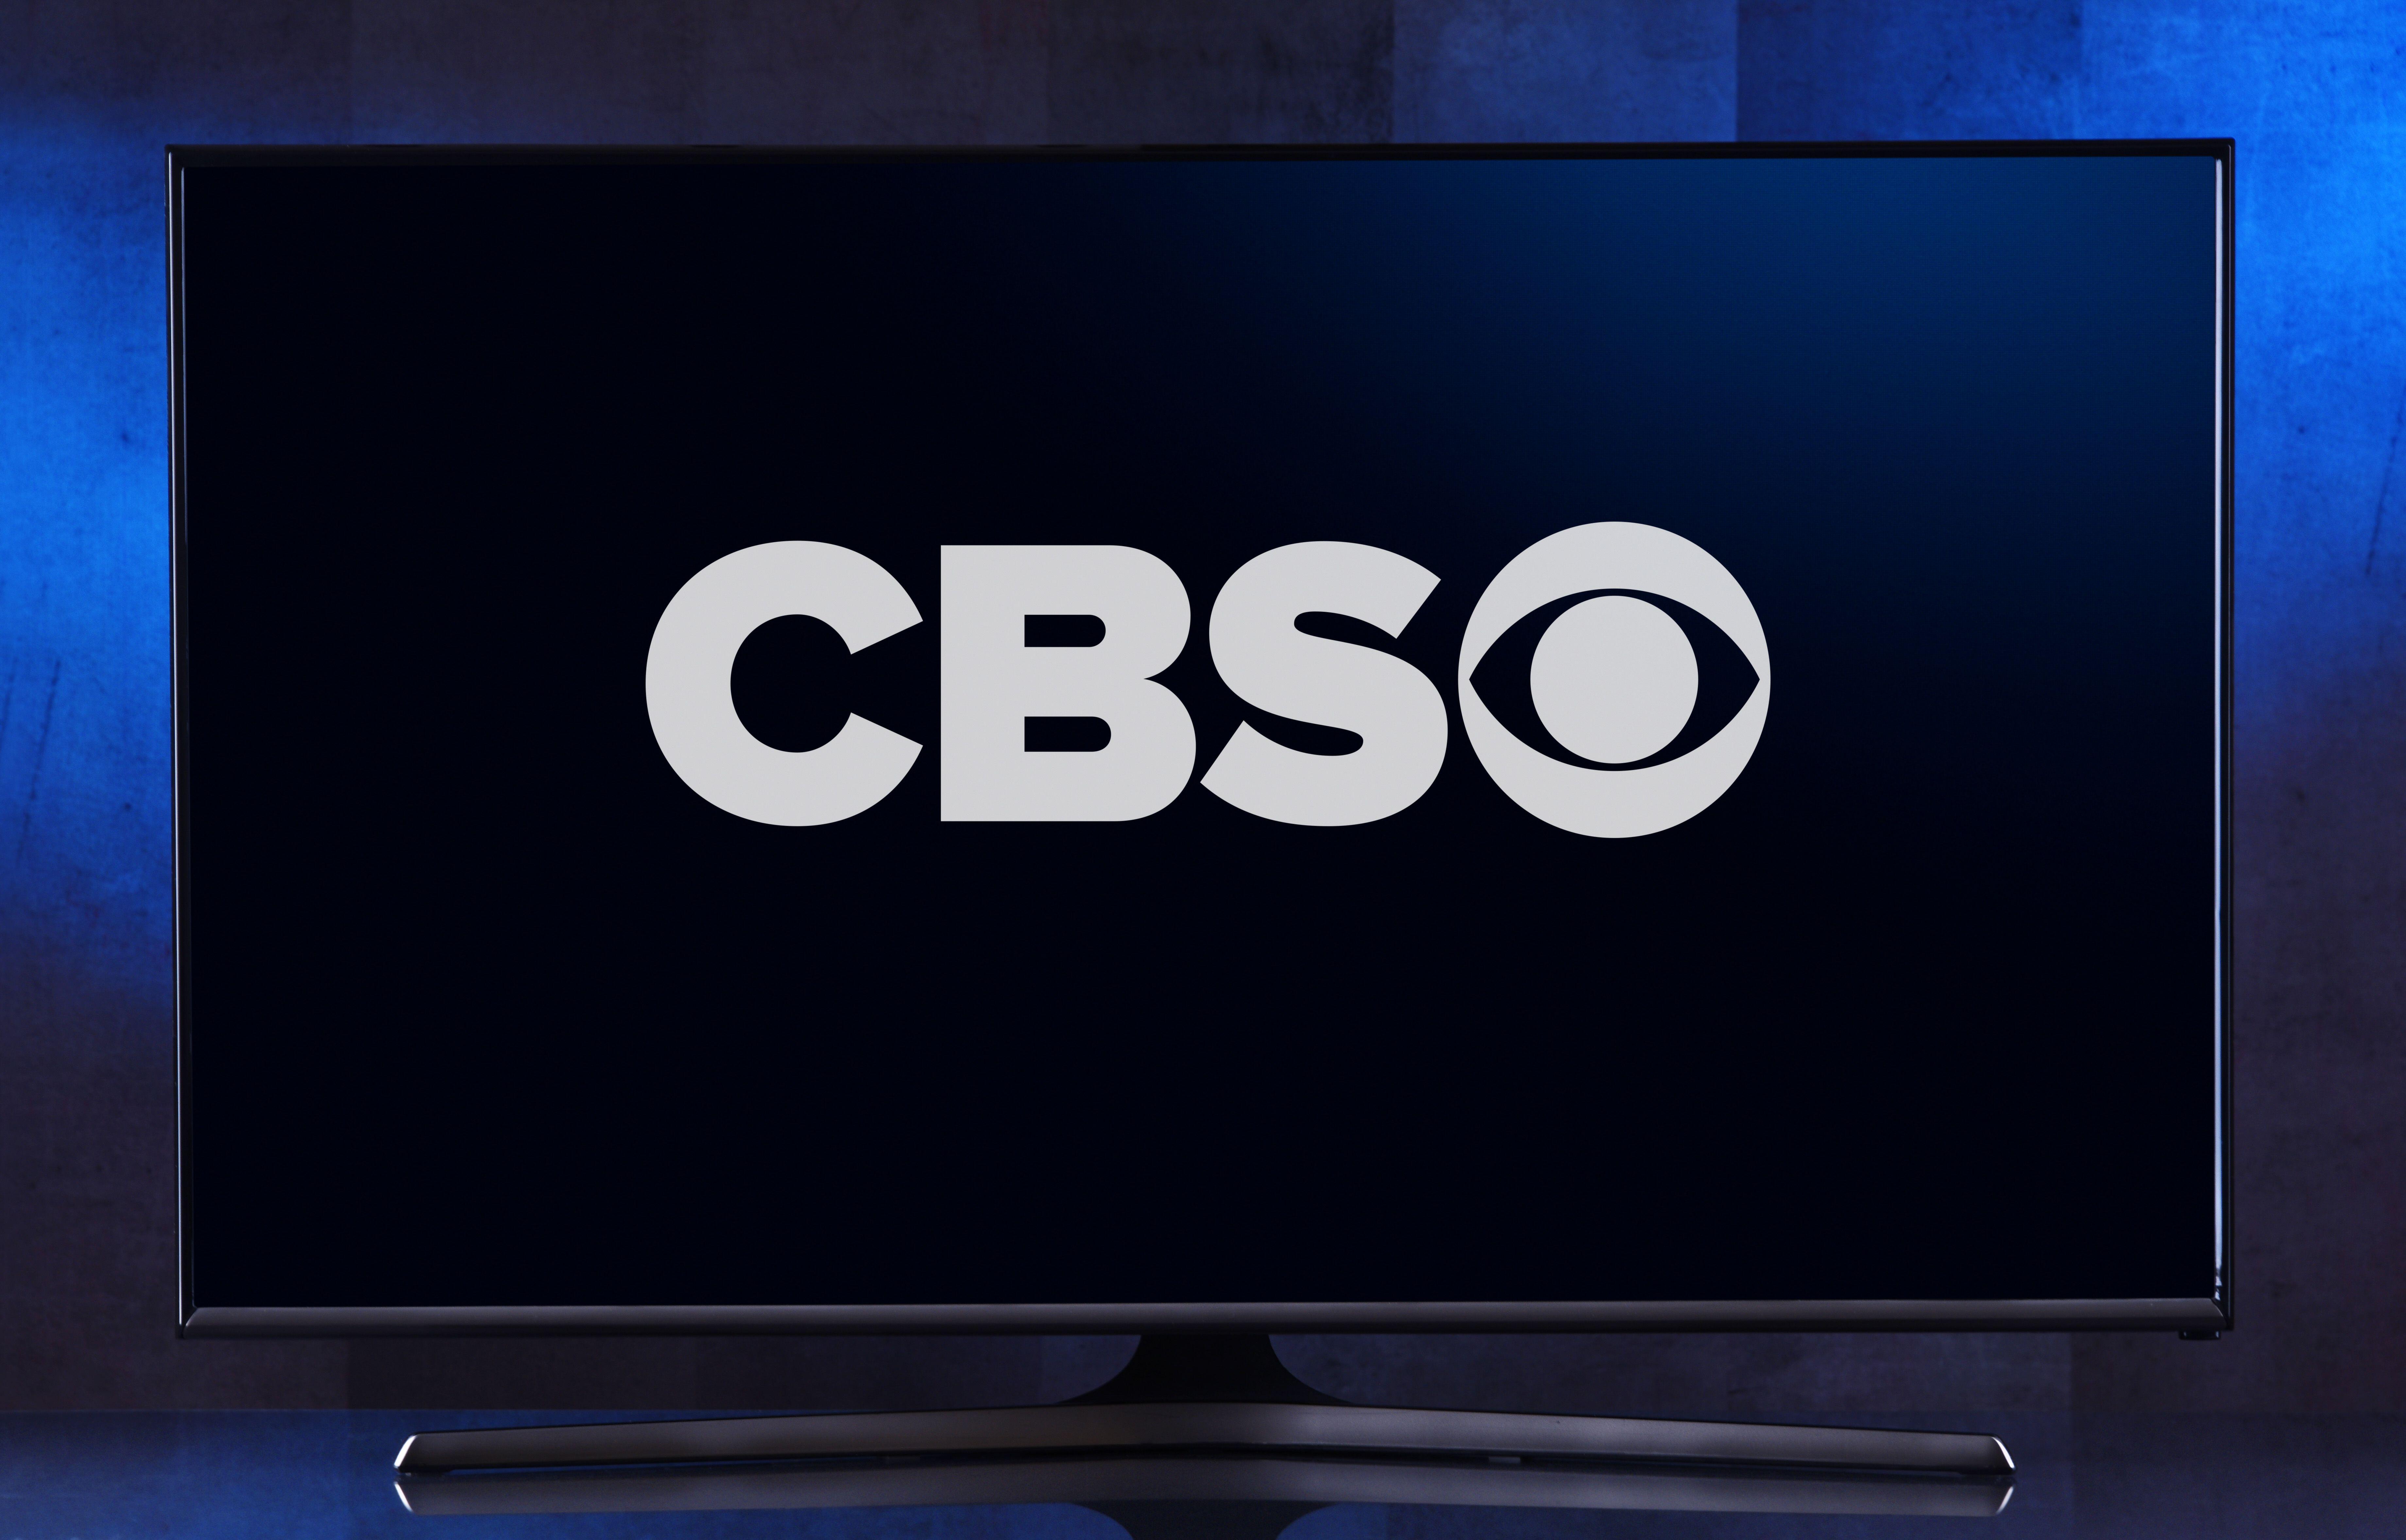 CBS has moved premiere week back to October for most of its shows